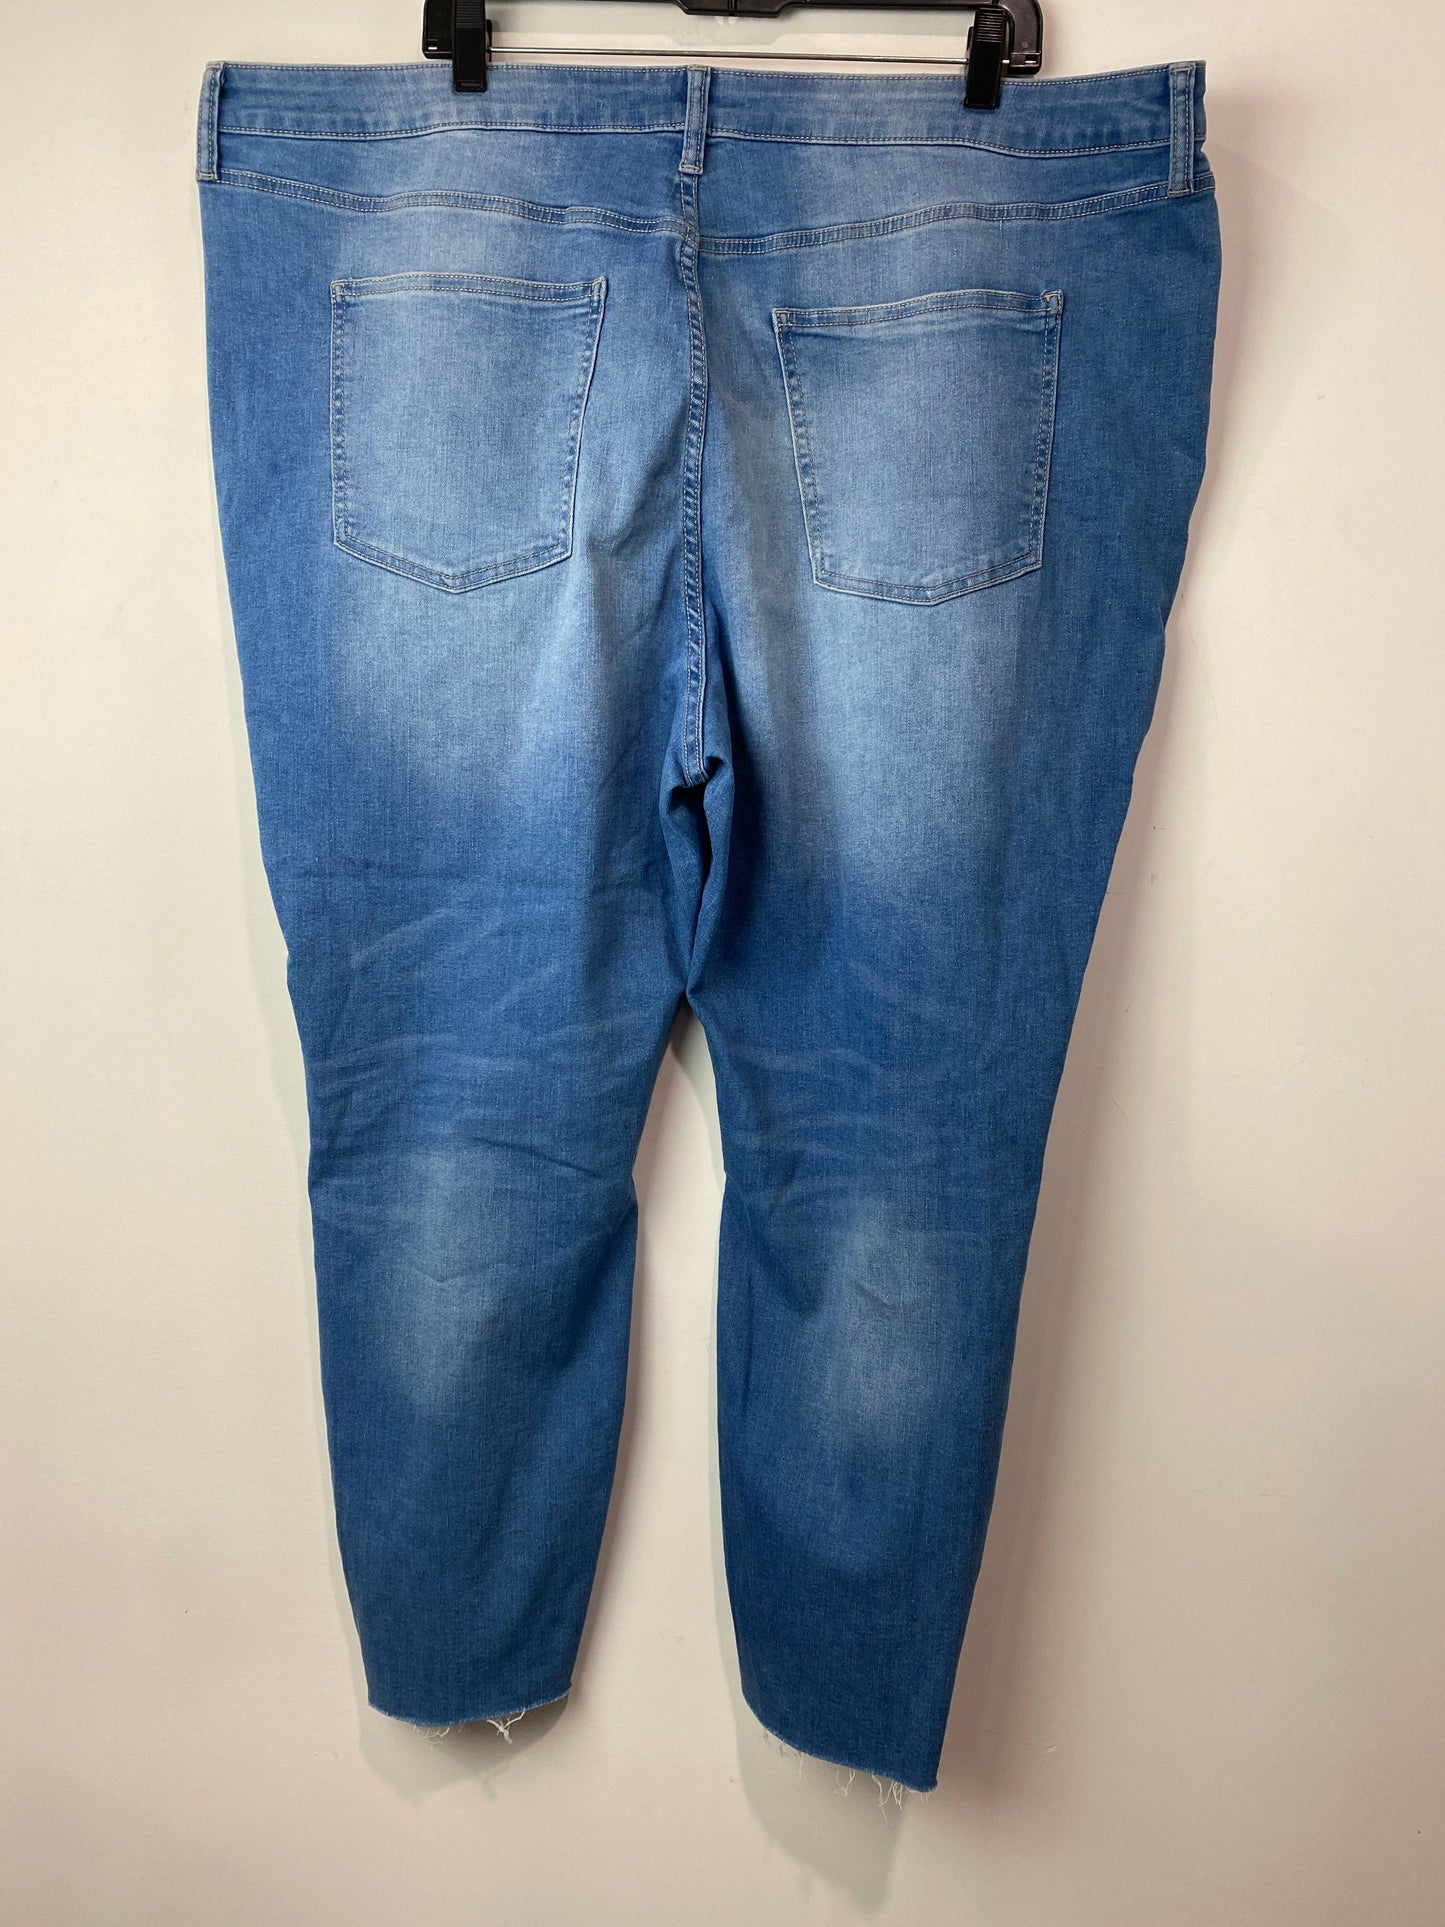 Jeans Skinny By Lc Lauren Conrad  Size: 24w